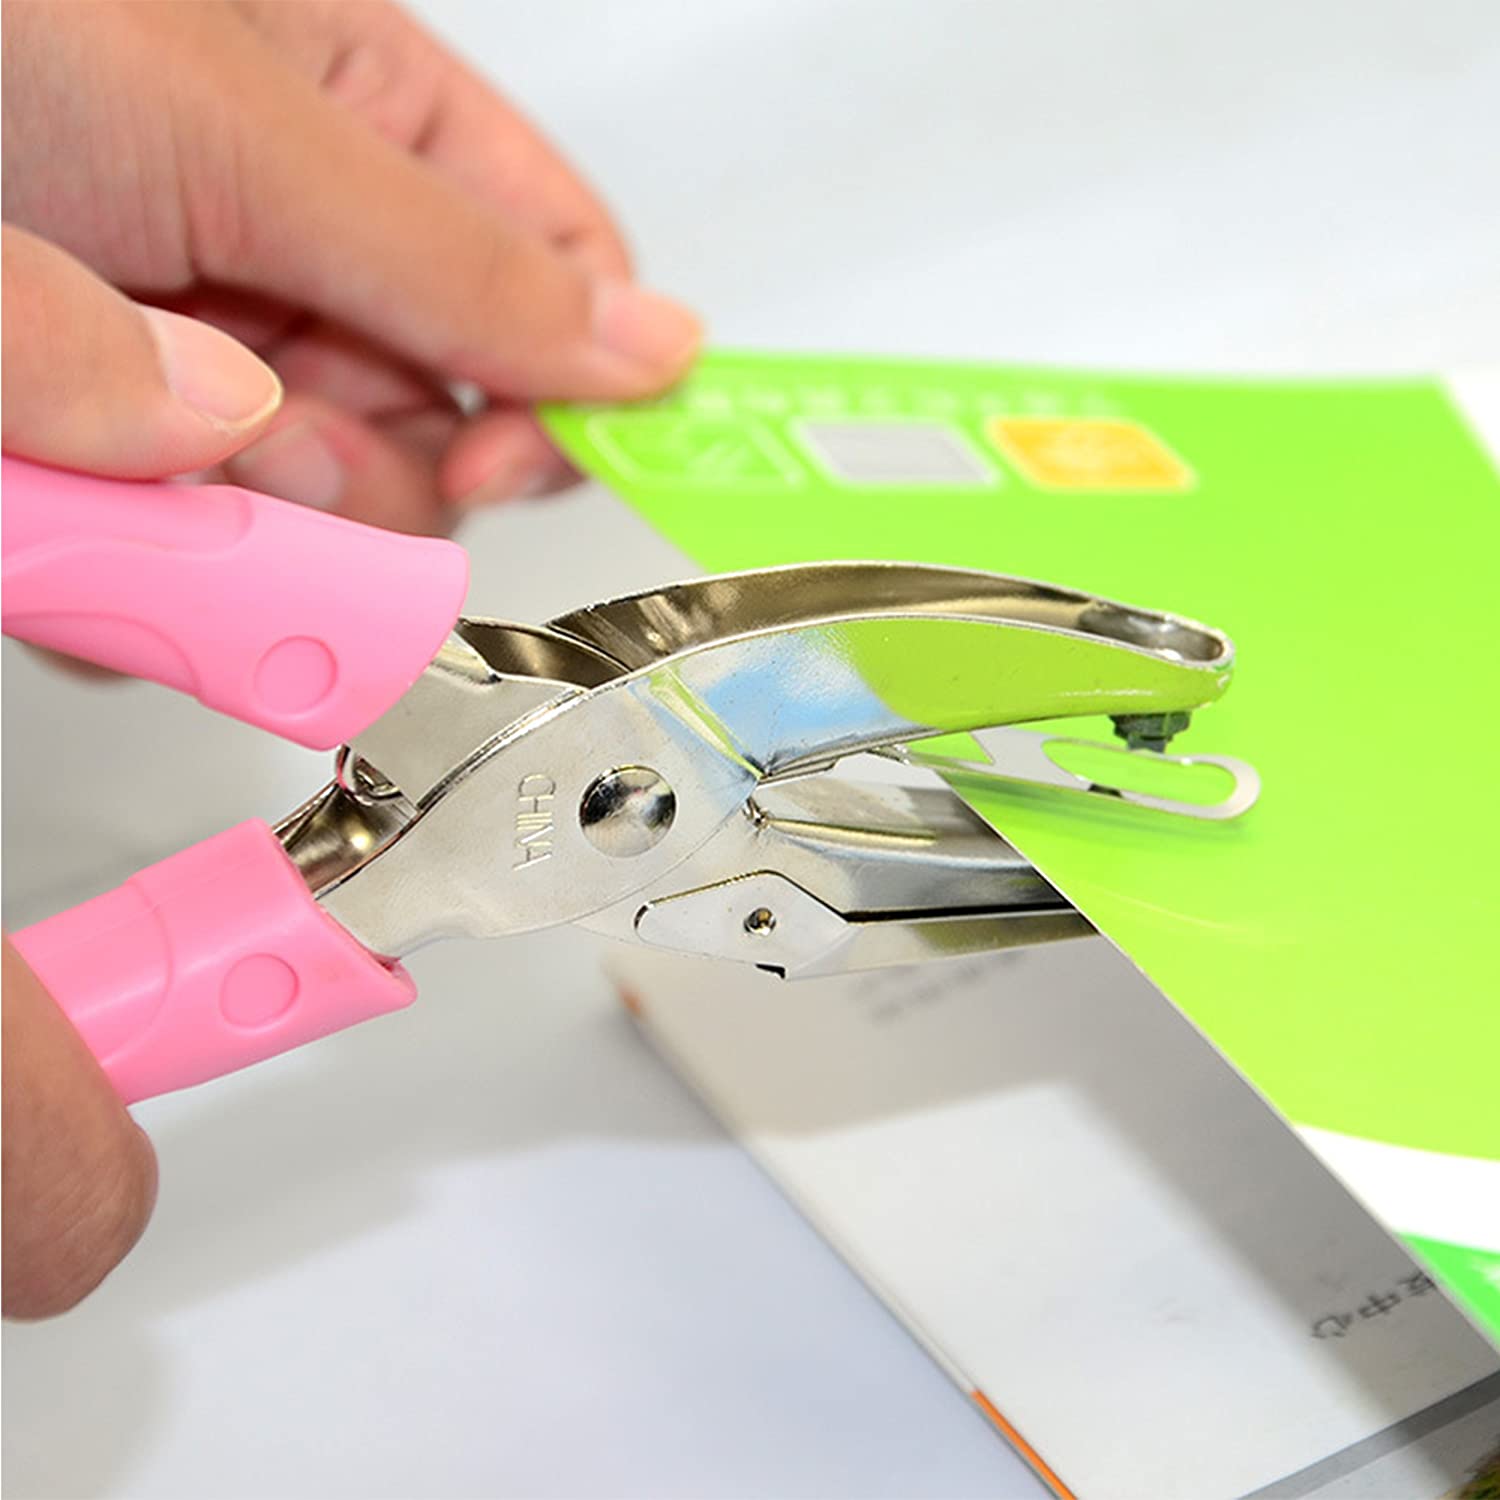 FREE - Single Hole Punch with Pink Handle, Special for Paper Cutting DIY Design - e4cents